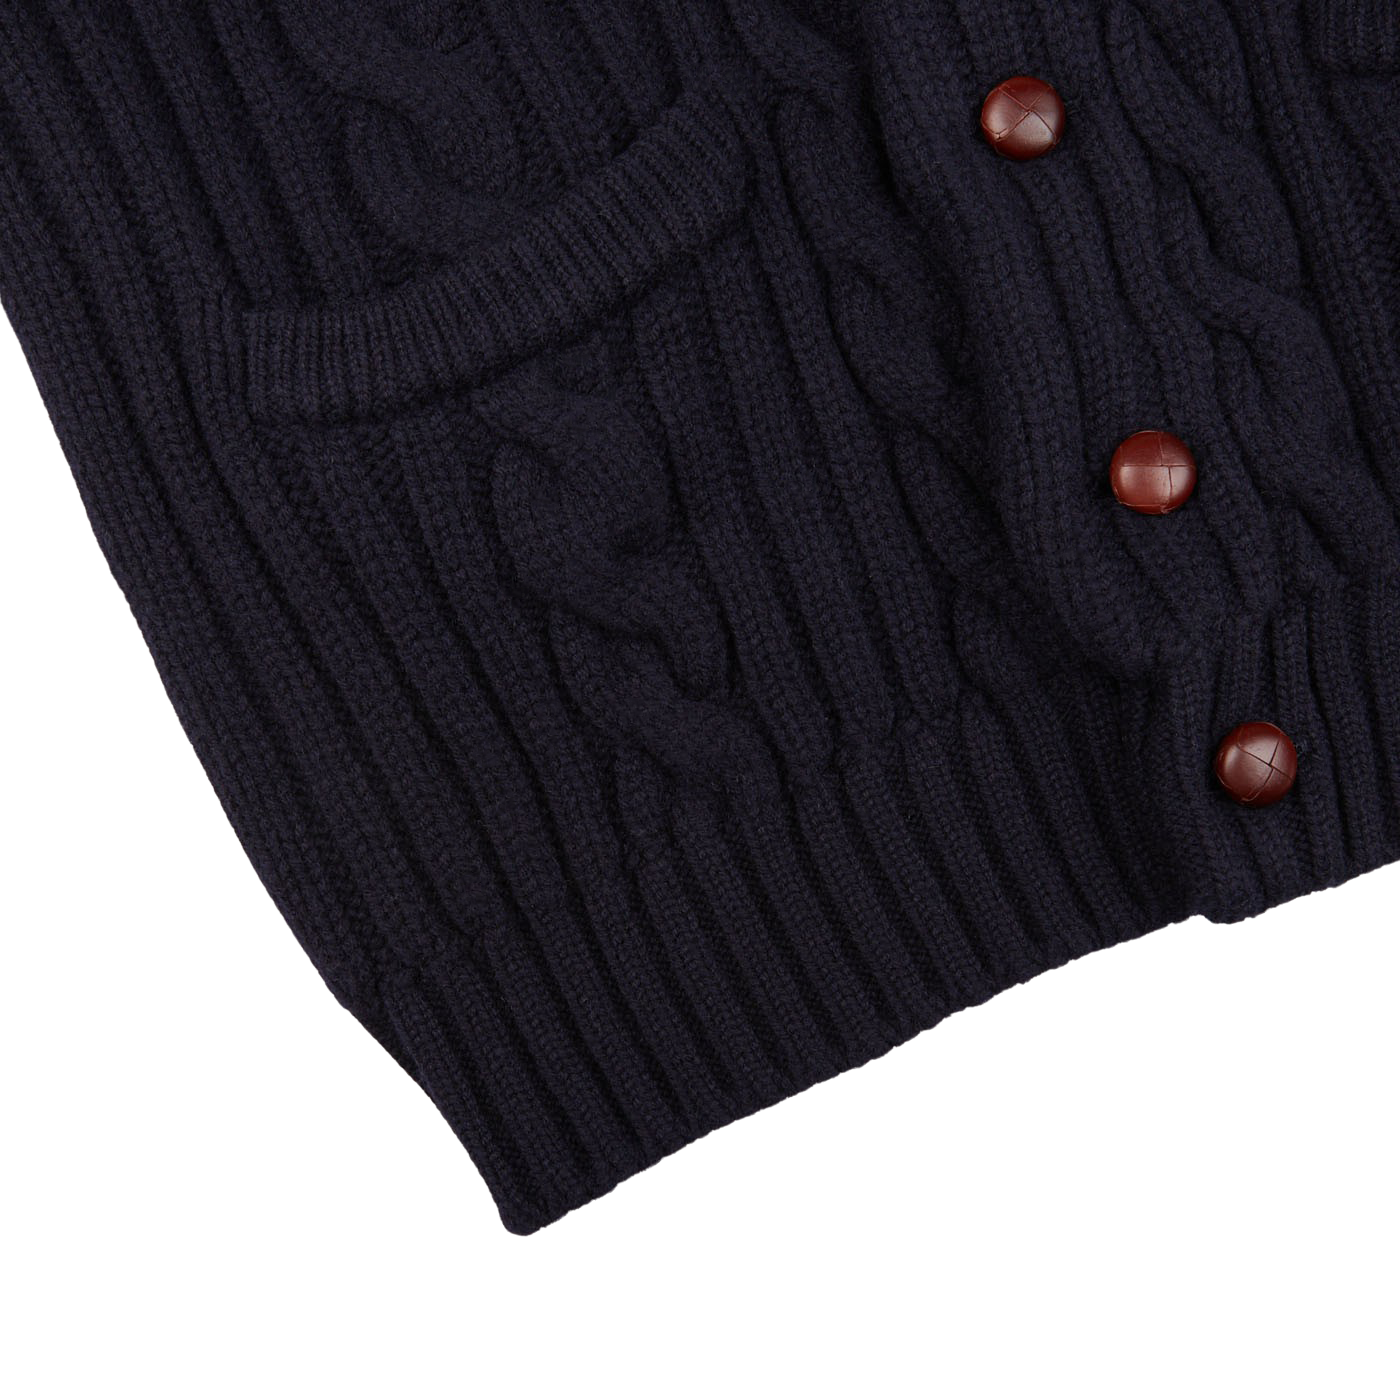 A Navy Cable-Knit Lambswool Shawl Collar Cardigan with buttons on the front manufactured by William Lockie.